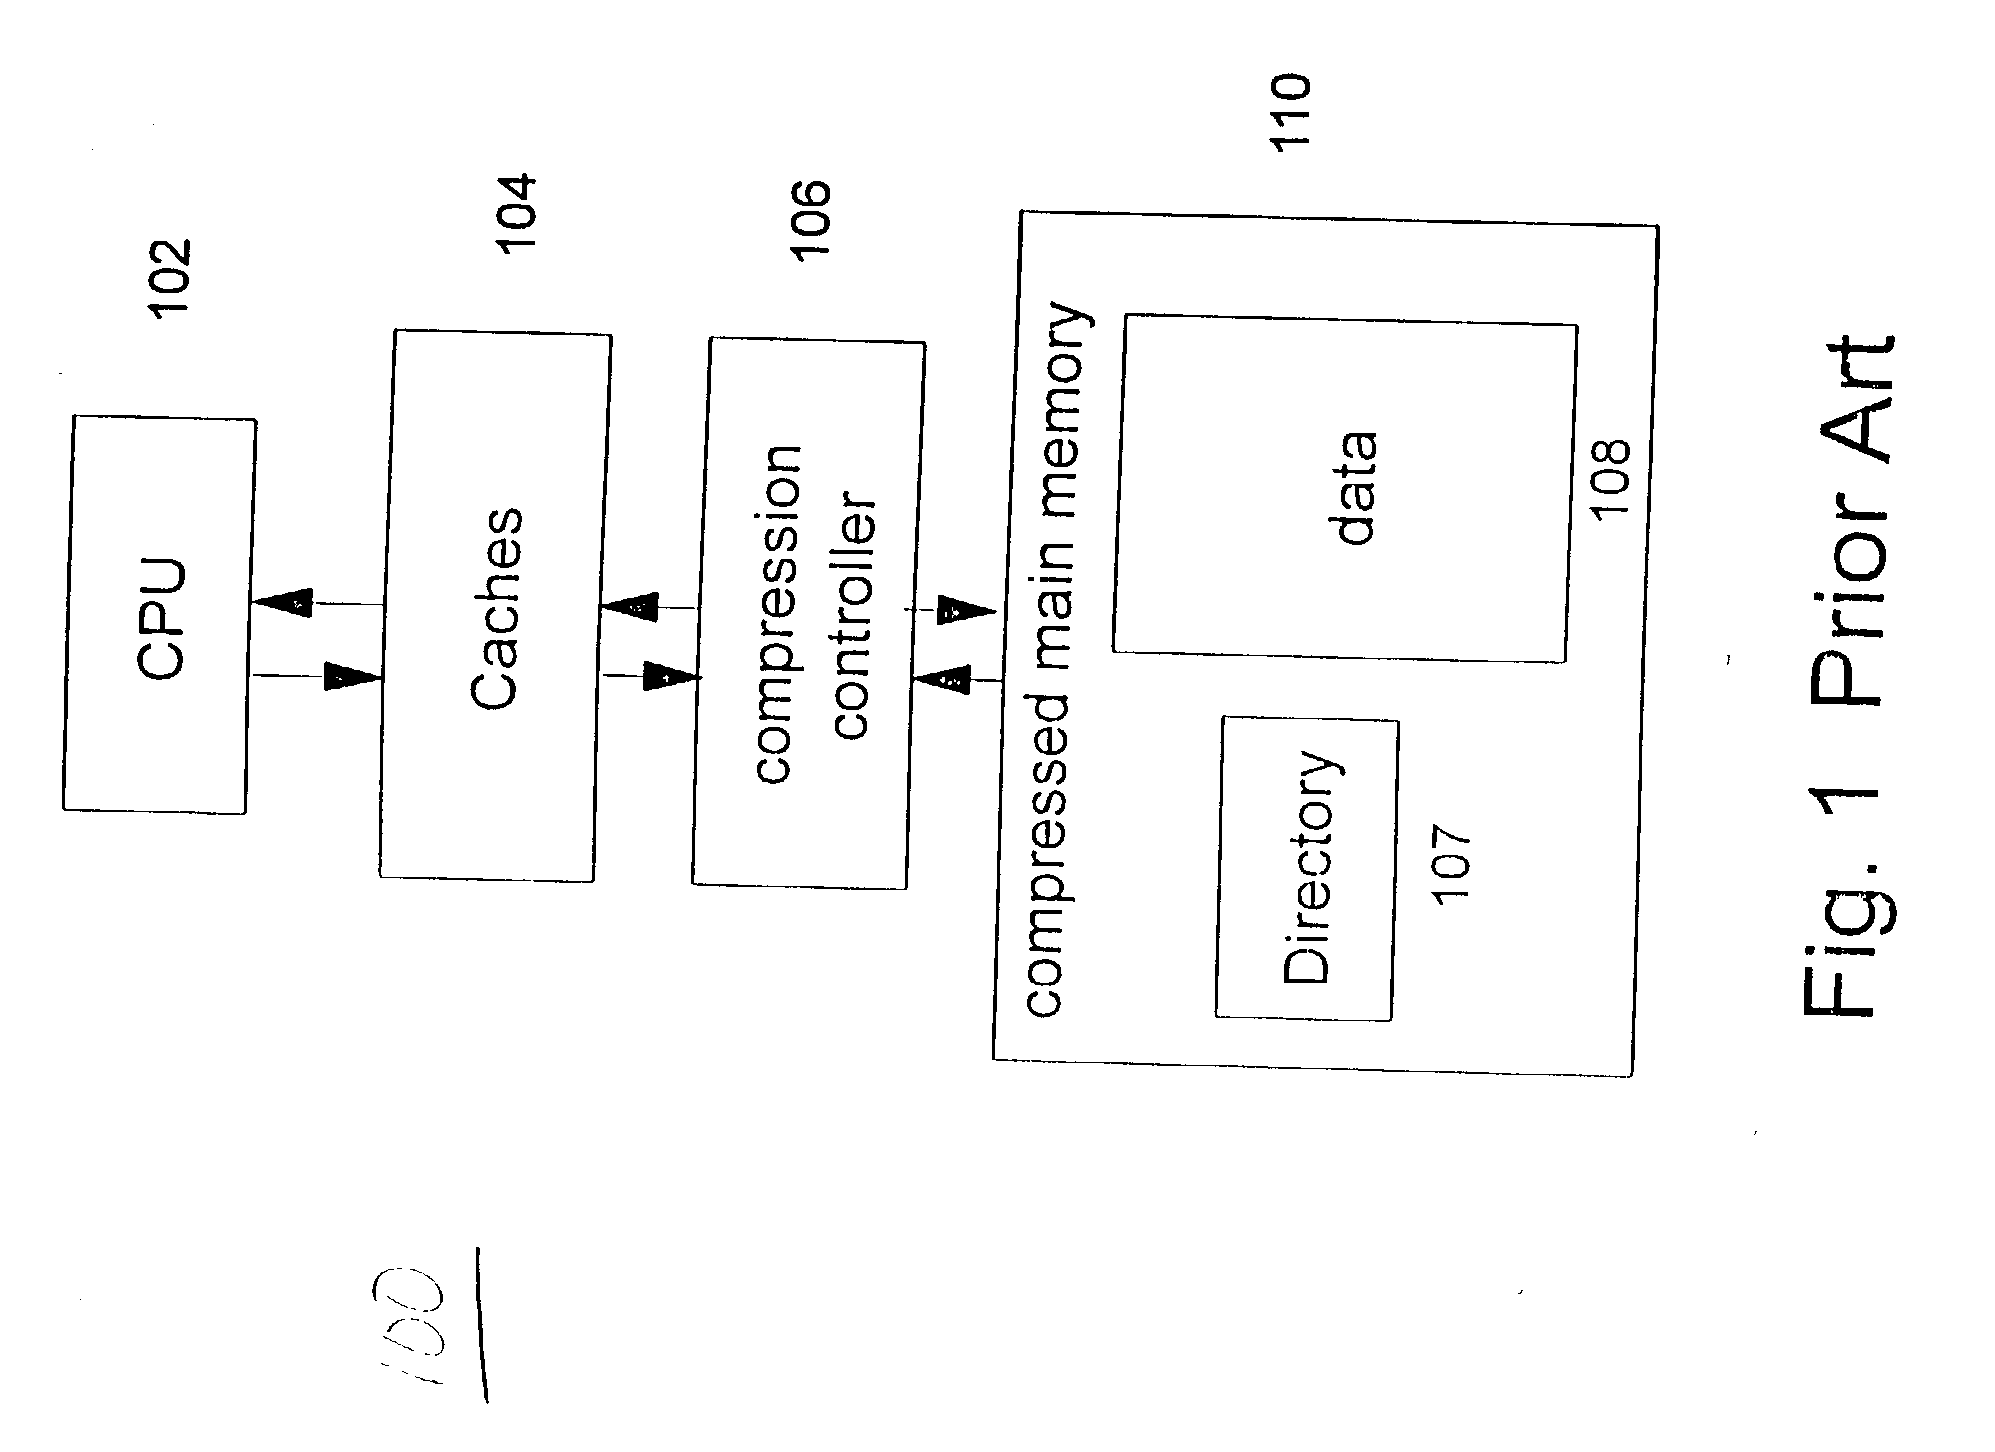 Method and system for storing memory compressed data onto memory compressed disks